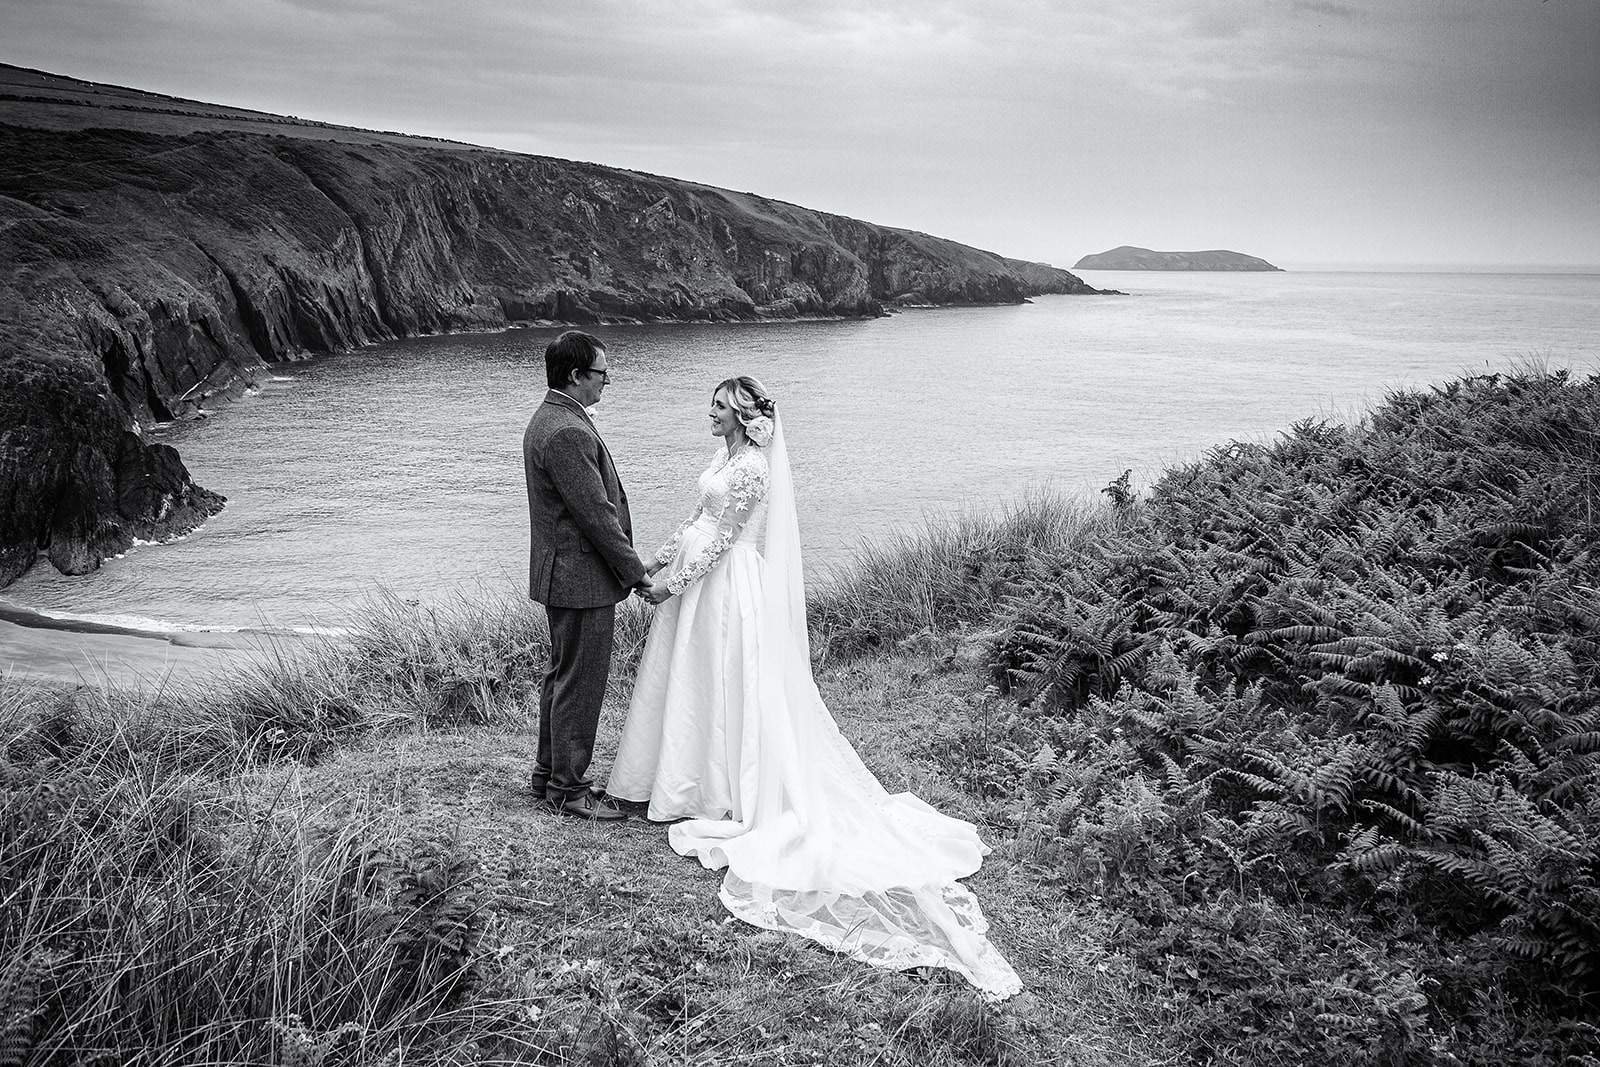 Wedding photography on the cliffs at Mwnt